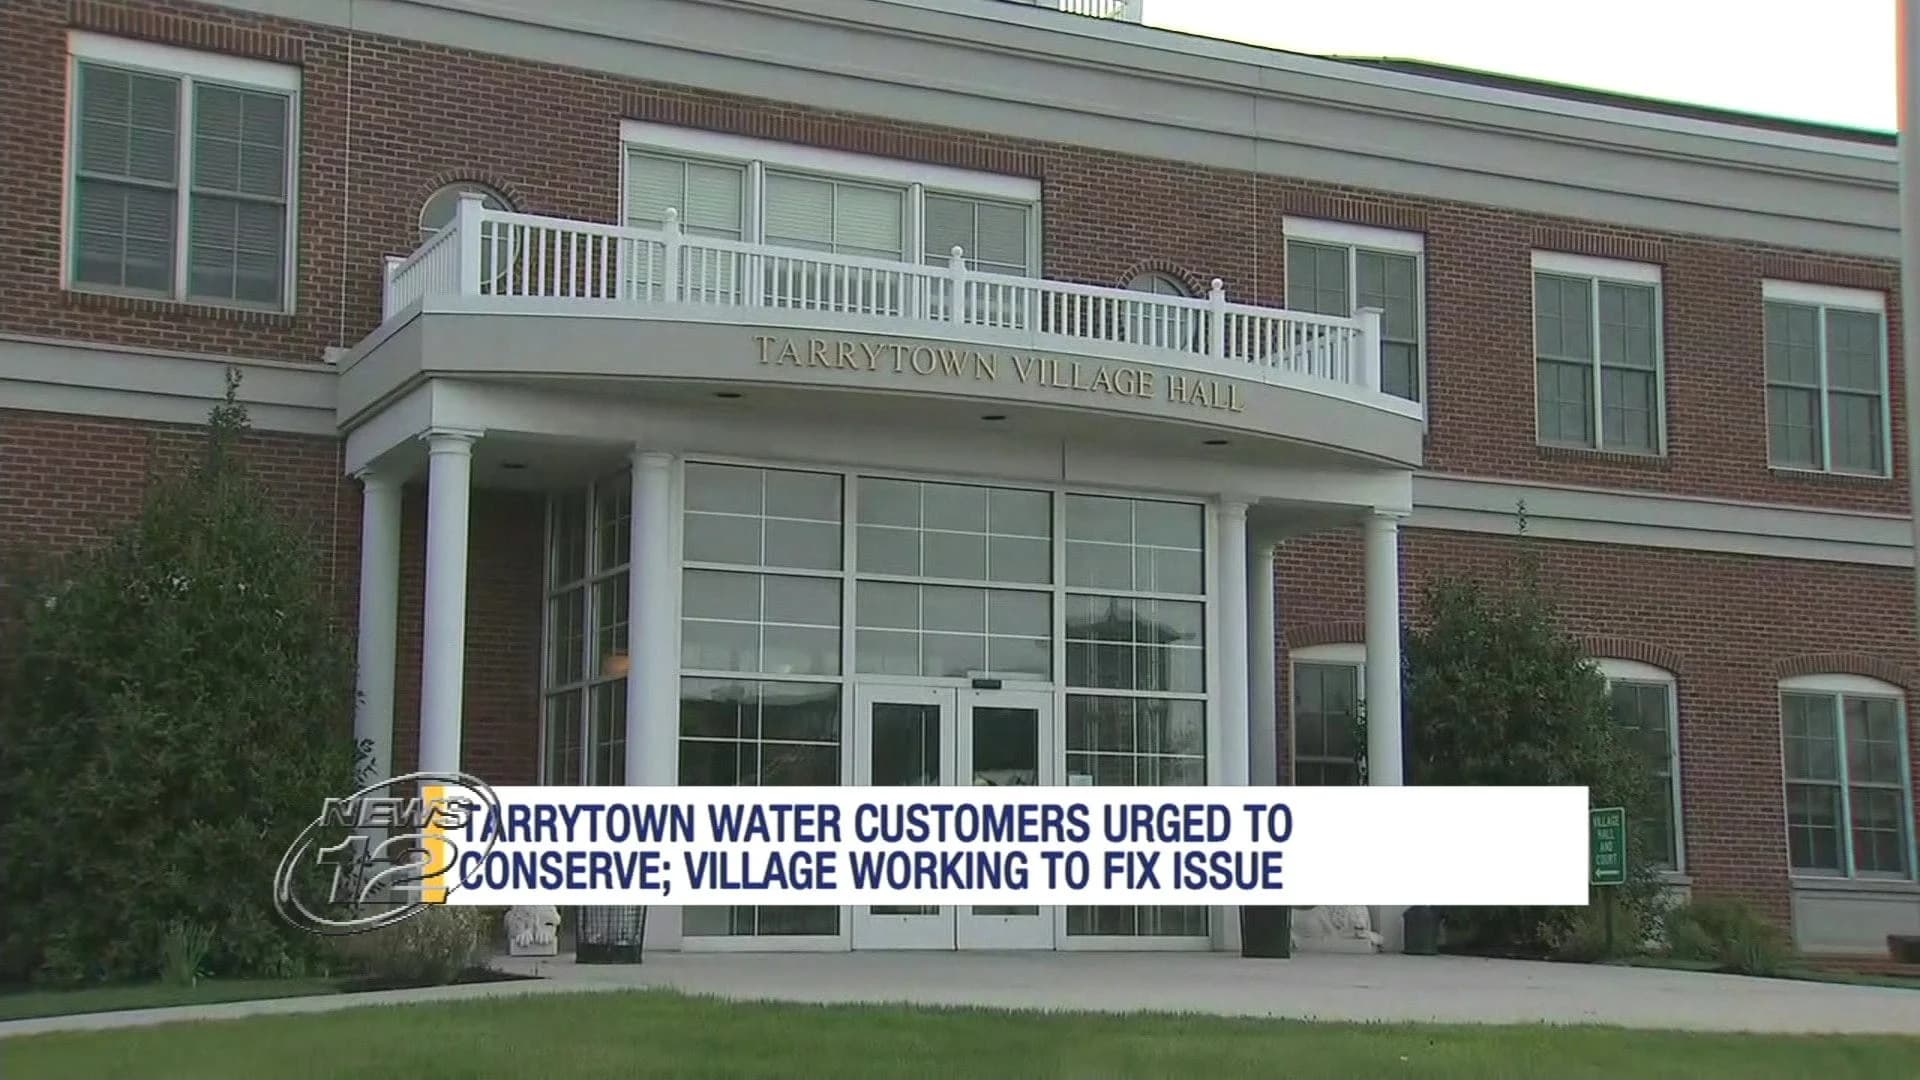 Tarrytown asks residents to conserve water